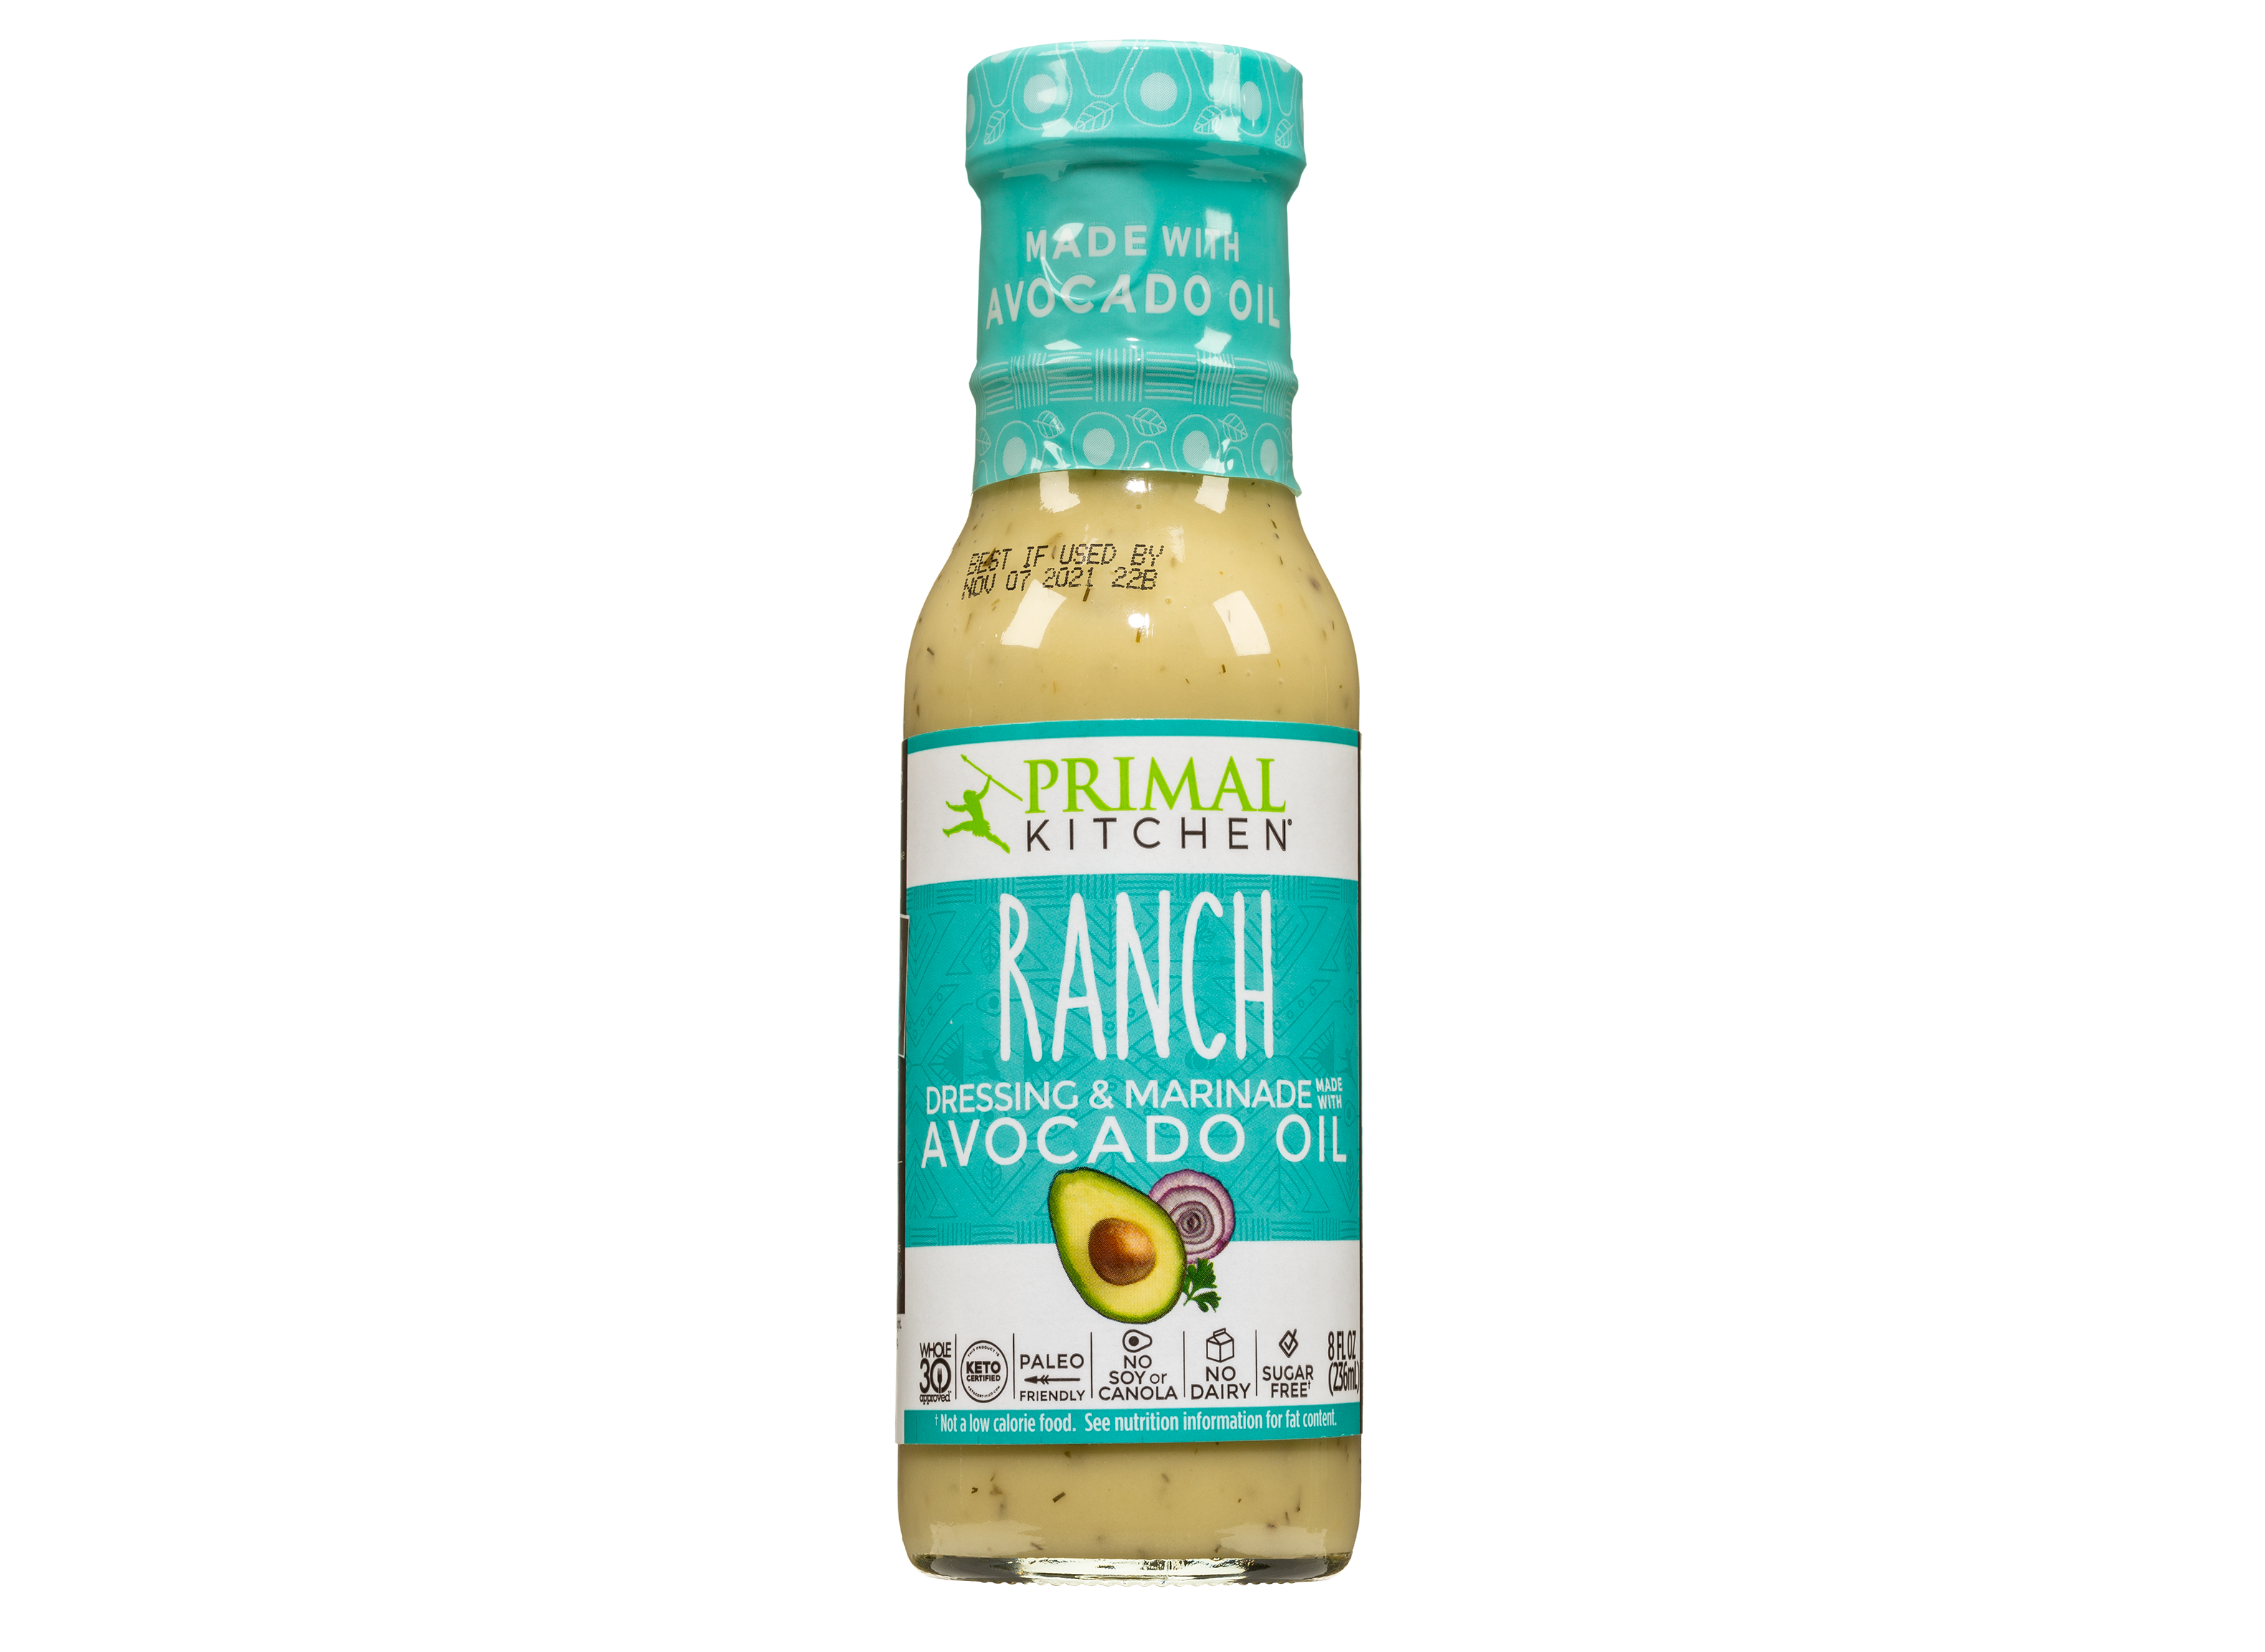 https://crdms.images.consumerreports.org/prod/products/cr/models/402732-ranch-primal-kitchen-ranch-dressing-marinade-made-with-avocado-oil-10018188.png